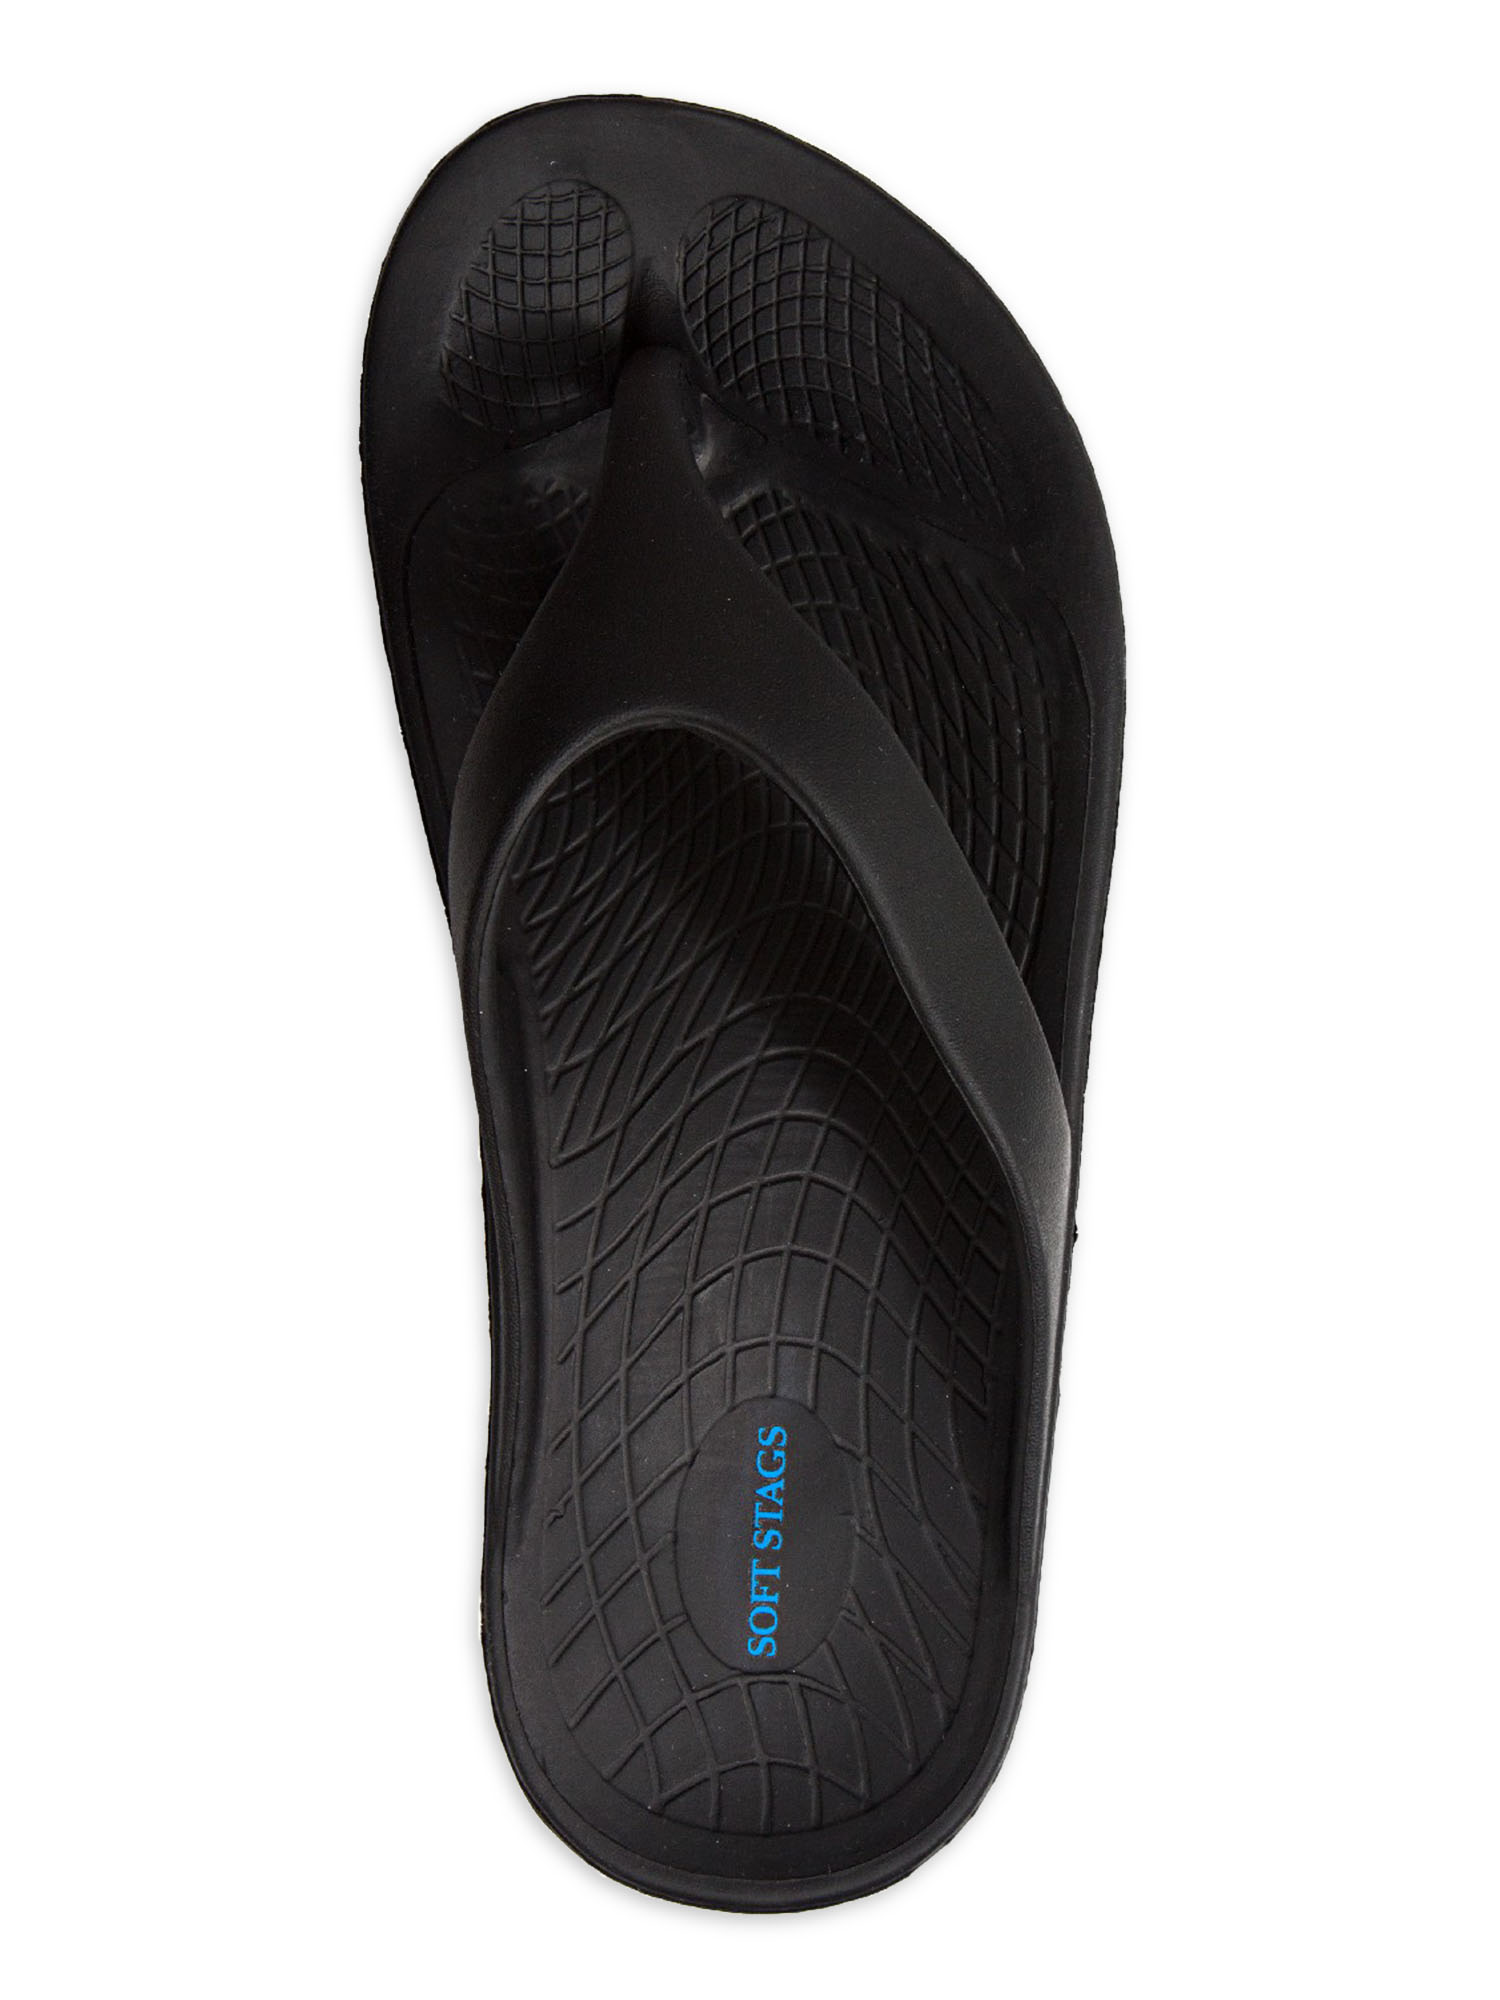 Deer Stags Unisex Wally Comfort Cushioned Thong Sandal - image 2 of 2